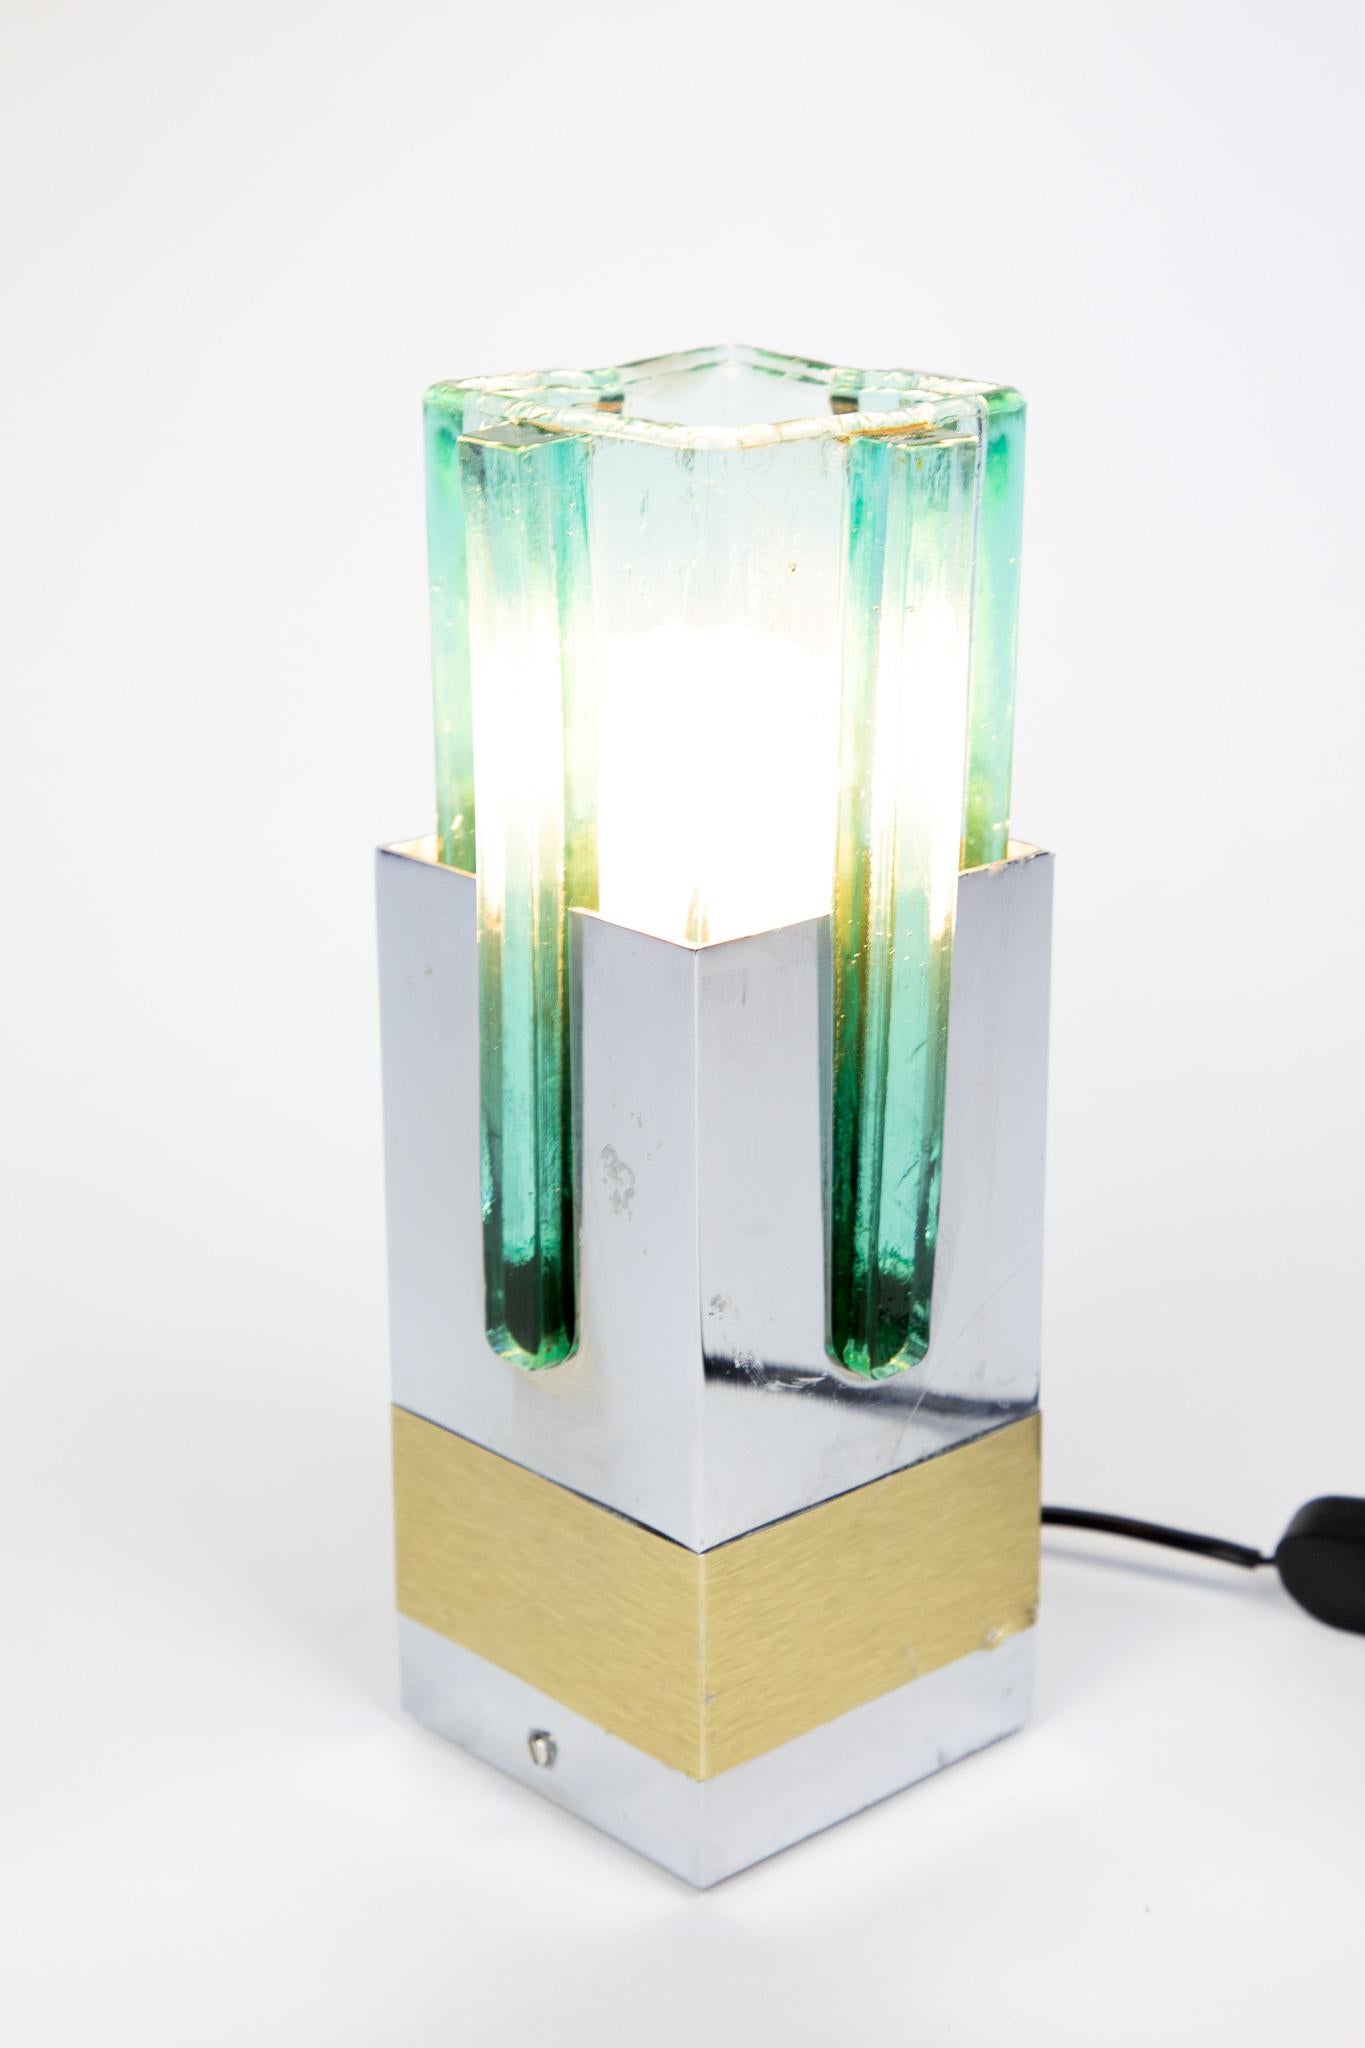 Late 20th Century Pair of  Table Lamps in Turquoise Glass, Brass and Chrome, Italy, 1970s For Sale